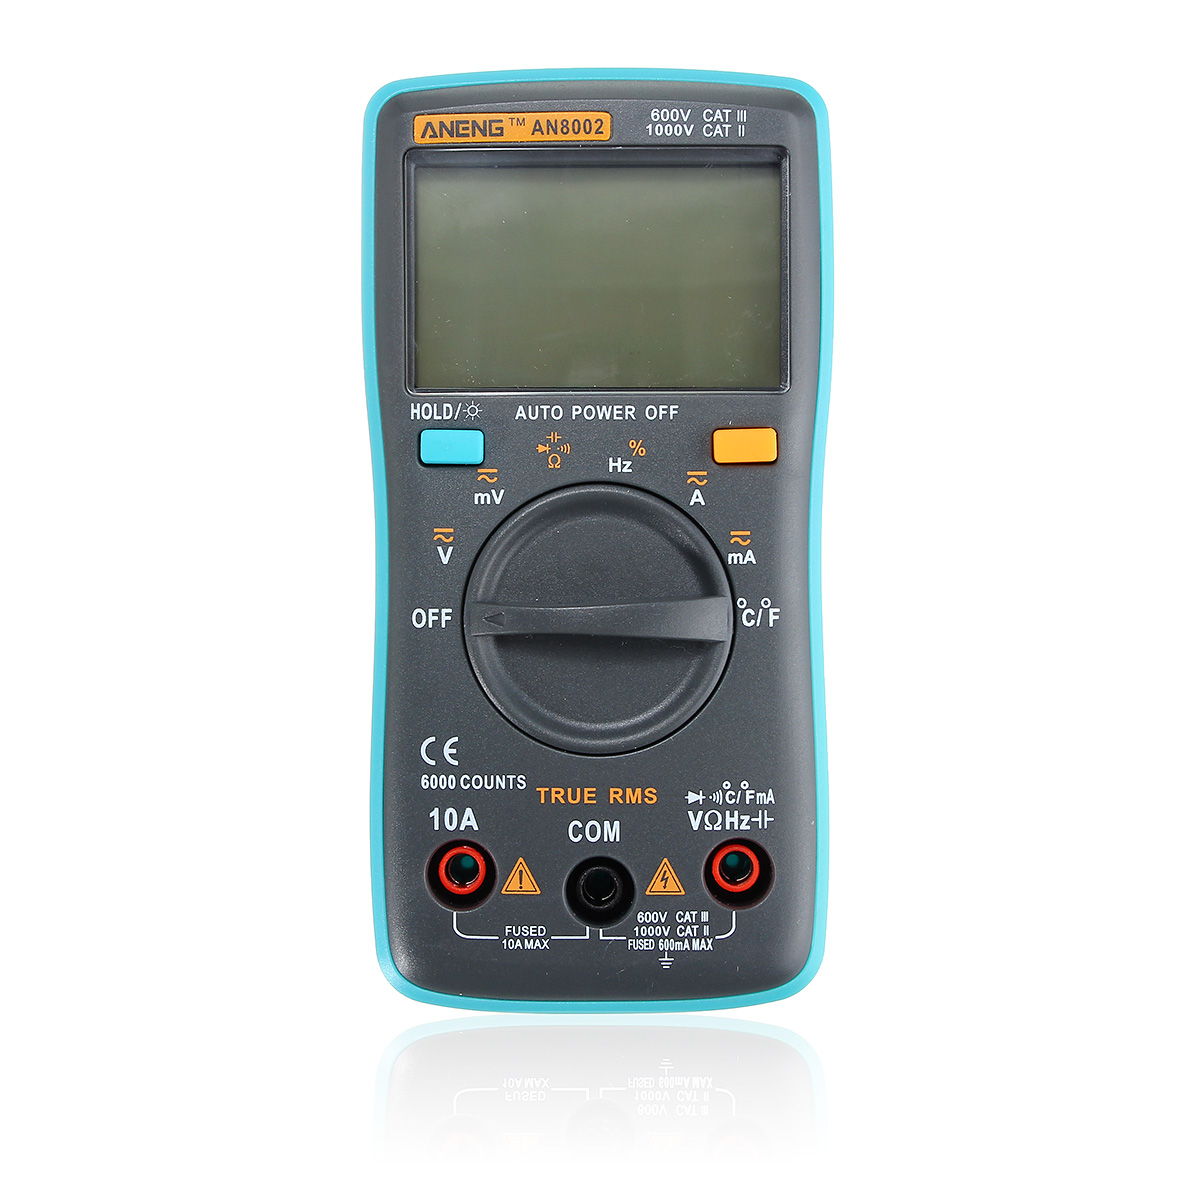 ANENG AN8002 Digital True RMS 6000 Counts Multimeter AC/DC Current Voltage Frequency Resistance Temperature Tester ℃/℉ 151